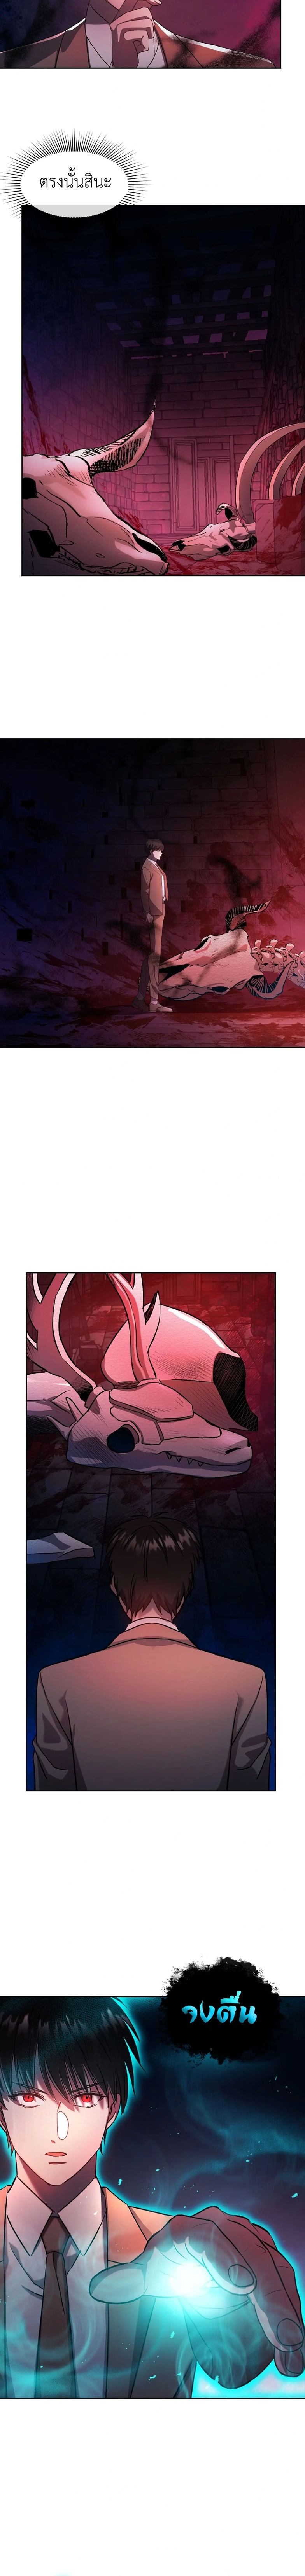 the iron blooded necromancer has returned 4.10